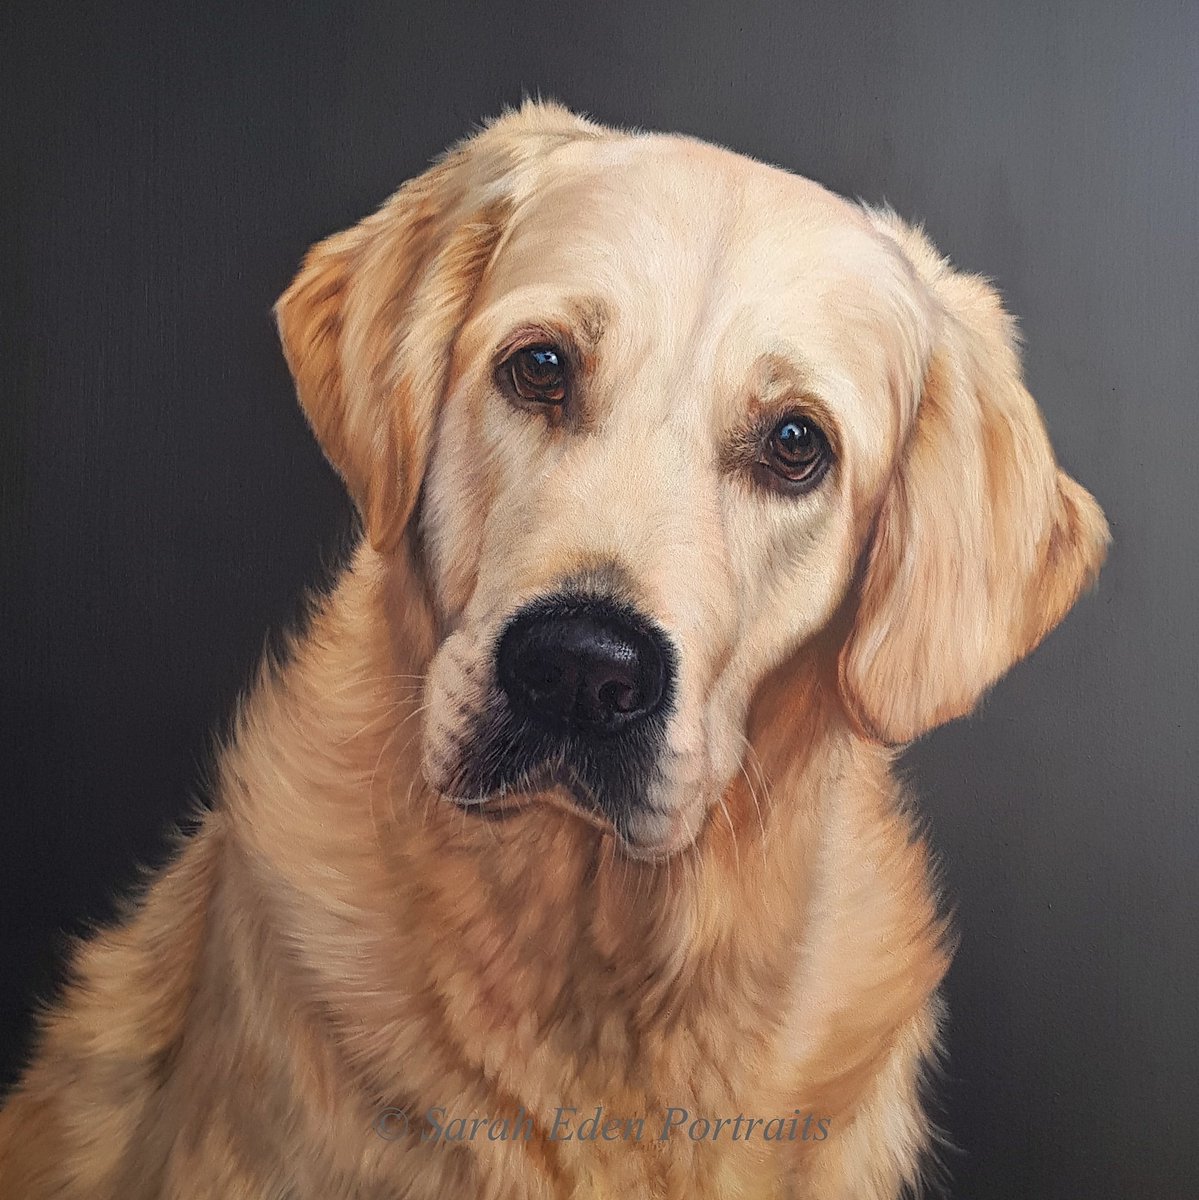 This is a real oldie but still one of my favourites! 

 'Islay', Oil on board, 16 x 16'

#retriever #goldenretriever #dogportrait #artist #petportrait #goldenretriever #retrieversofinstagram #retriever #retrievers #dogportrait #dogpainting #animalcreatives #animalart #oilpainting